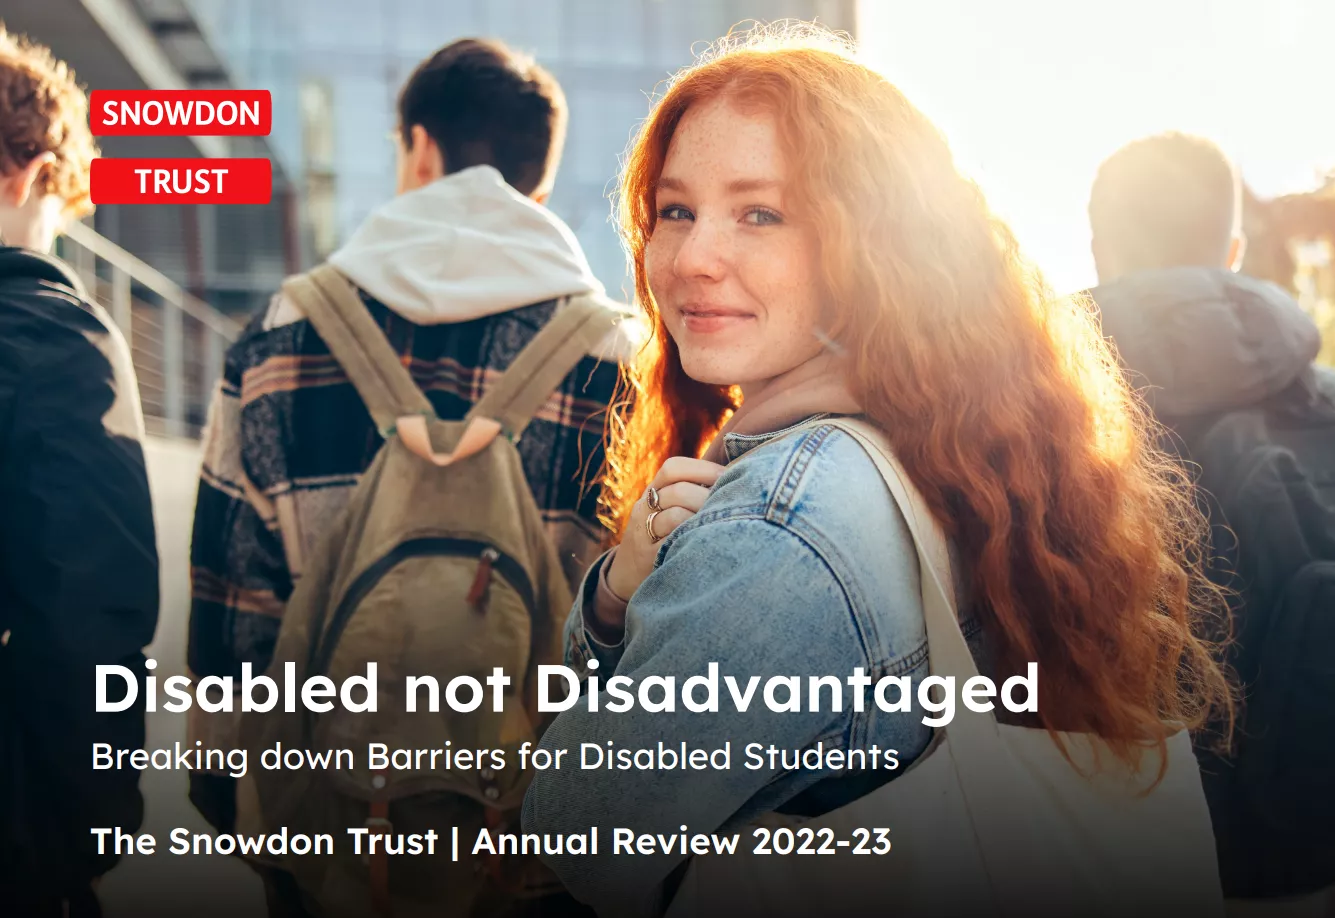 Front cover of The Snowdon Trust Annual Review 2022-23. The Snowdon Trust logo is in the top left, and the title 